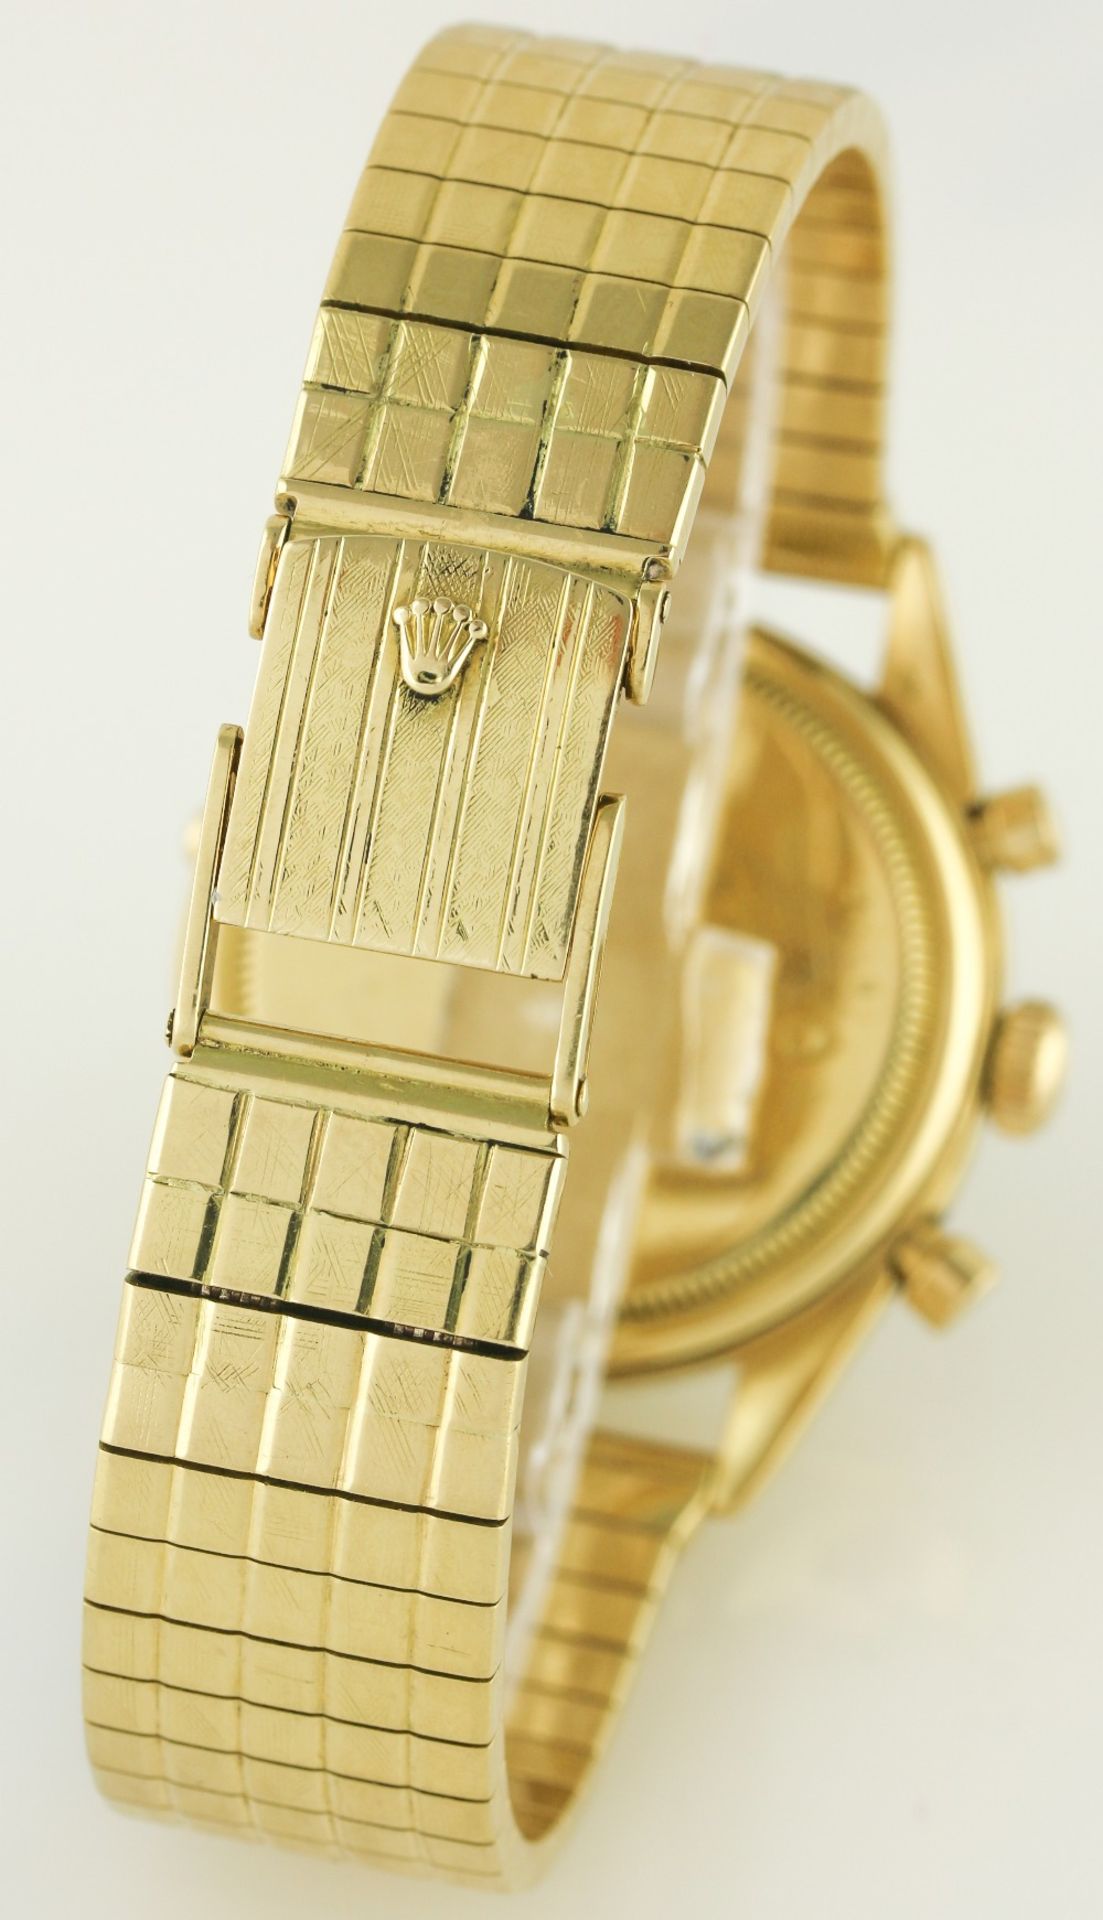 A FINE & RARE GENTLEMAN'S 18K SOLID GOLD ROLEX "JEAN-CLAUDE KILLY" OYSTER TRIPLE CALENDAR ANTI- - Image 9 of 13